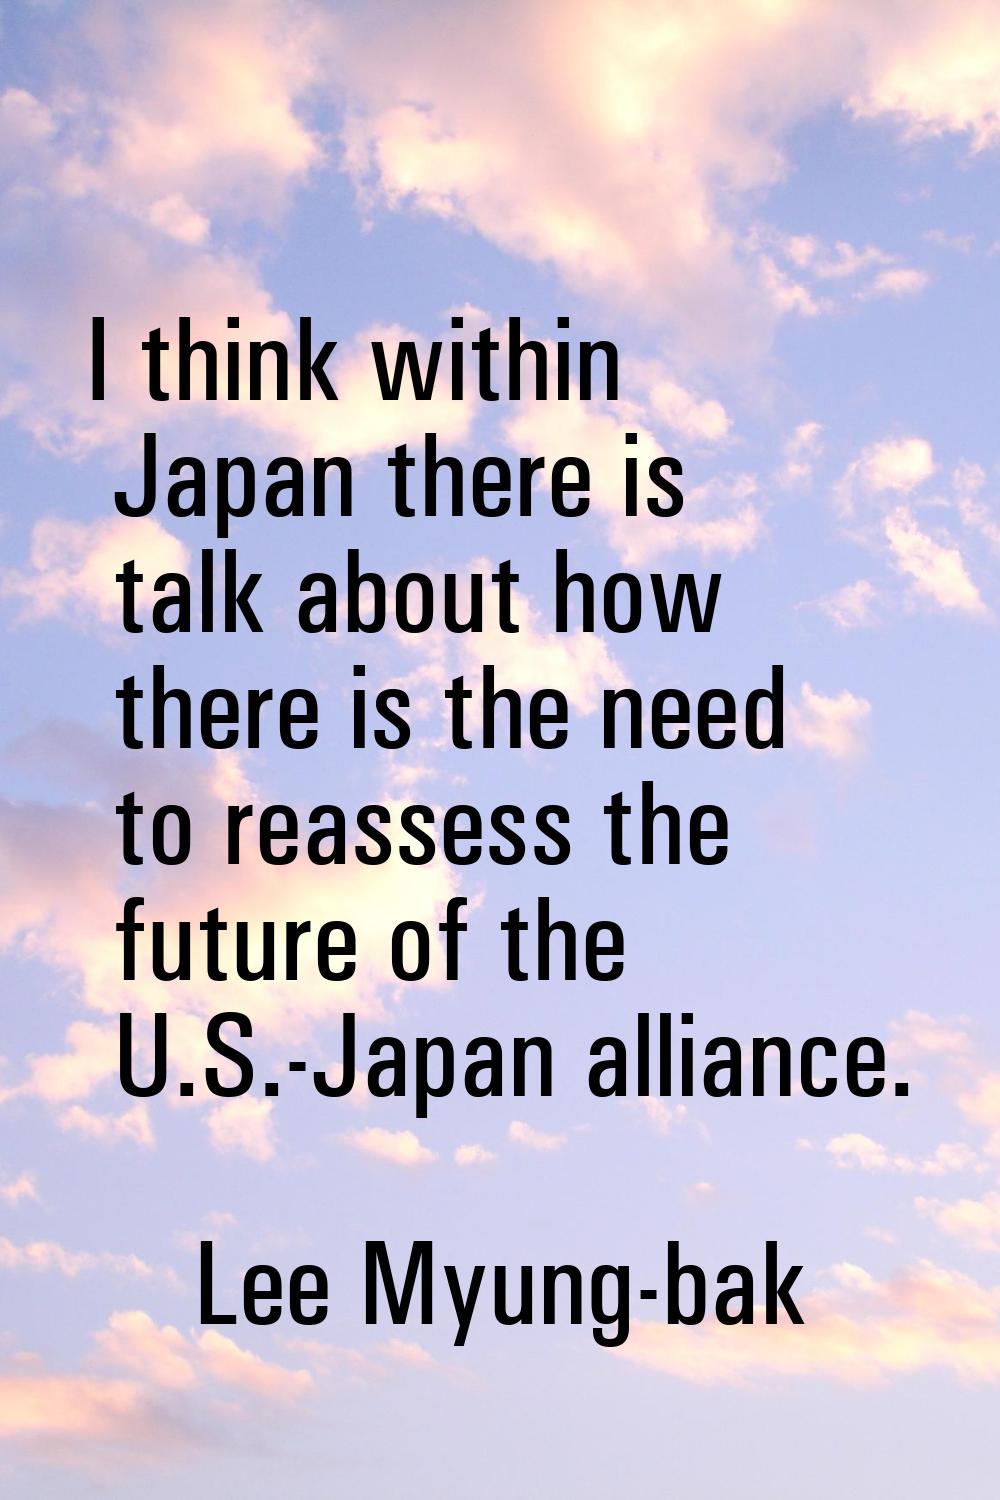 I think within Japan there is talk about how there is the need to reassess the future of the U.S.-J